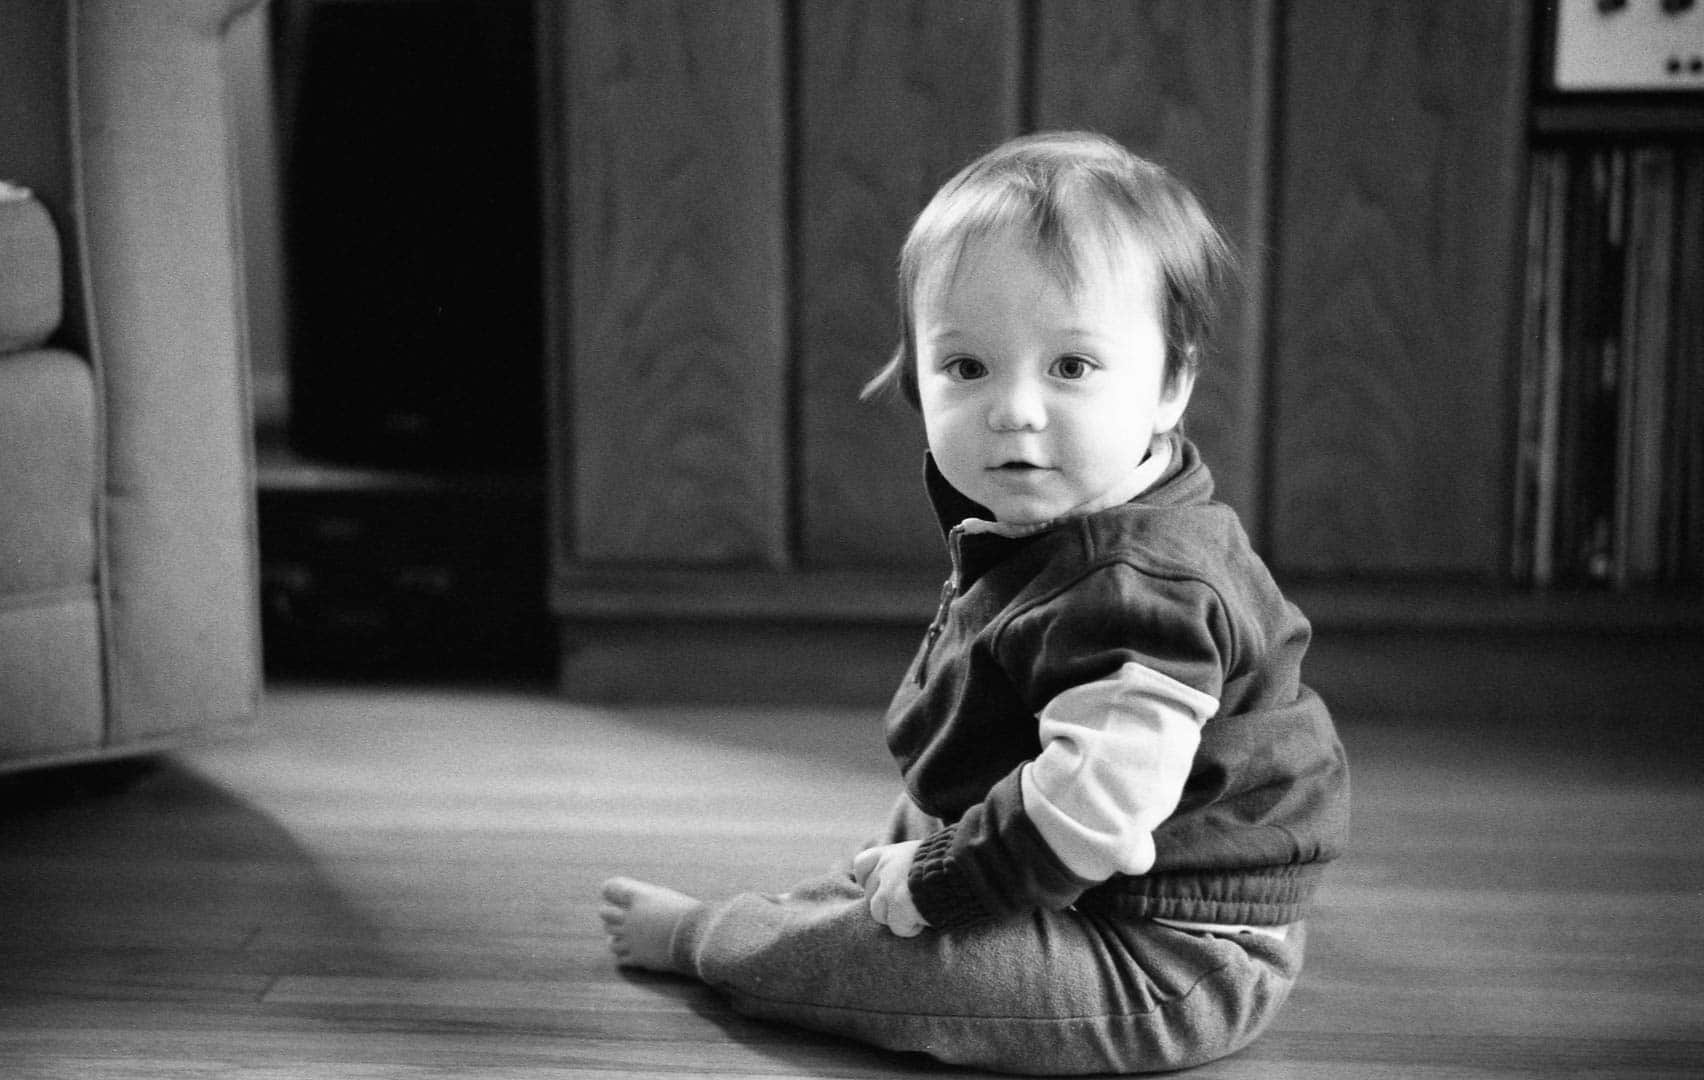 A baby sitting in a living room looking into the camera